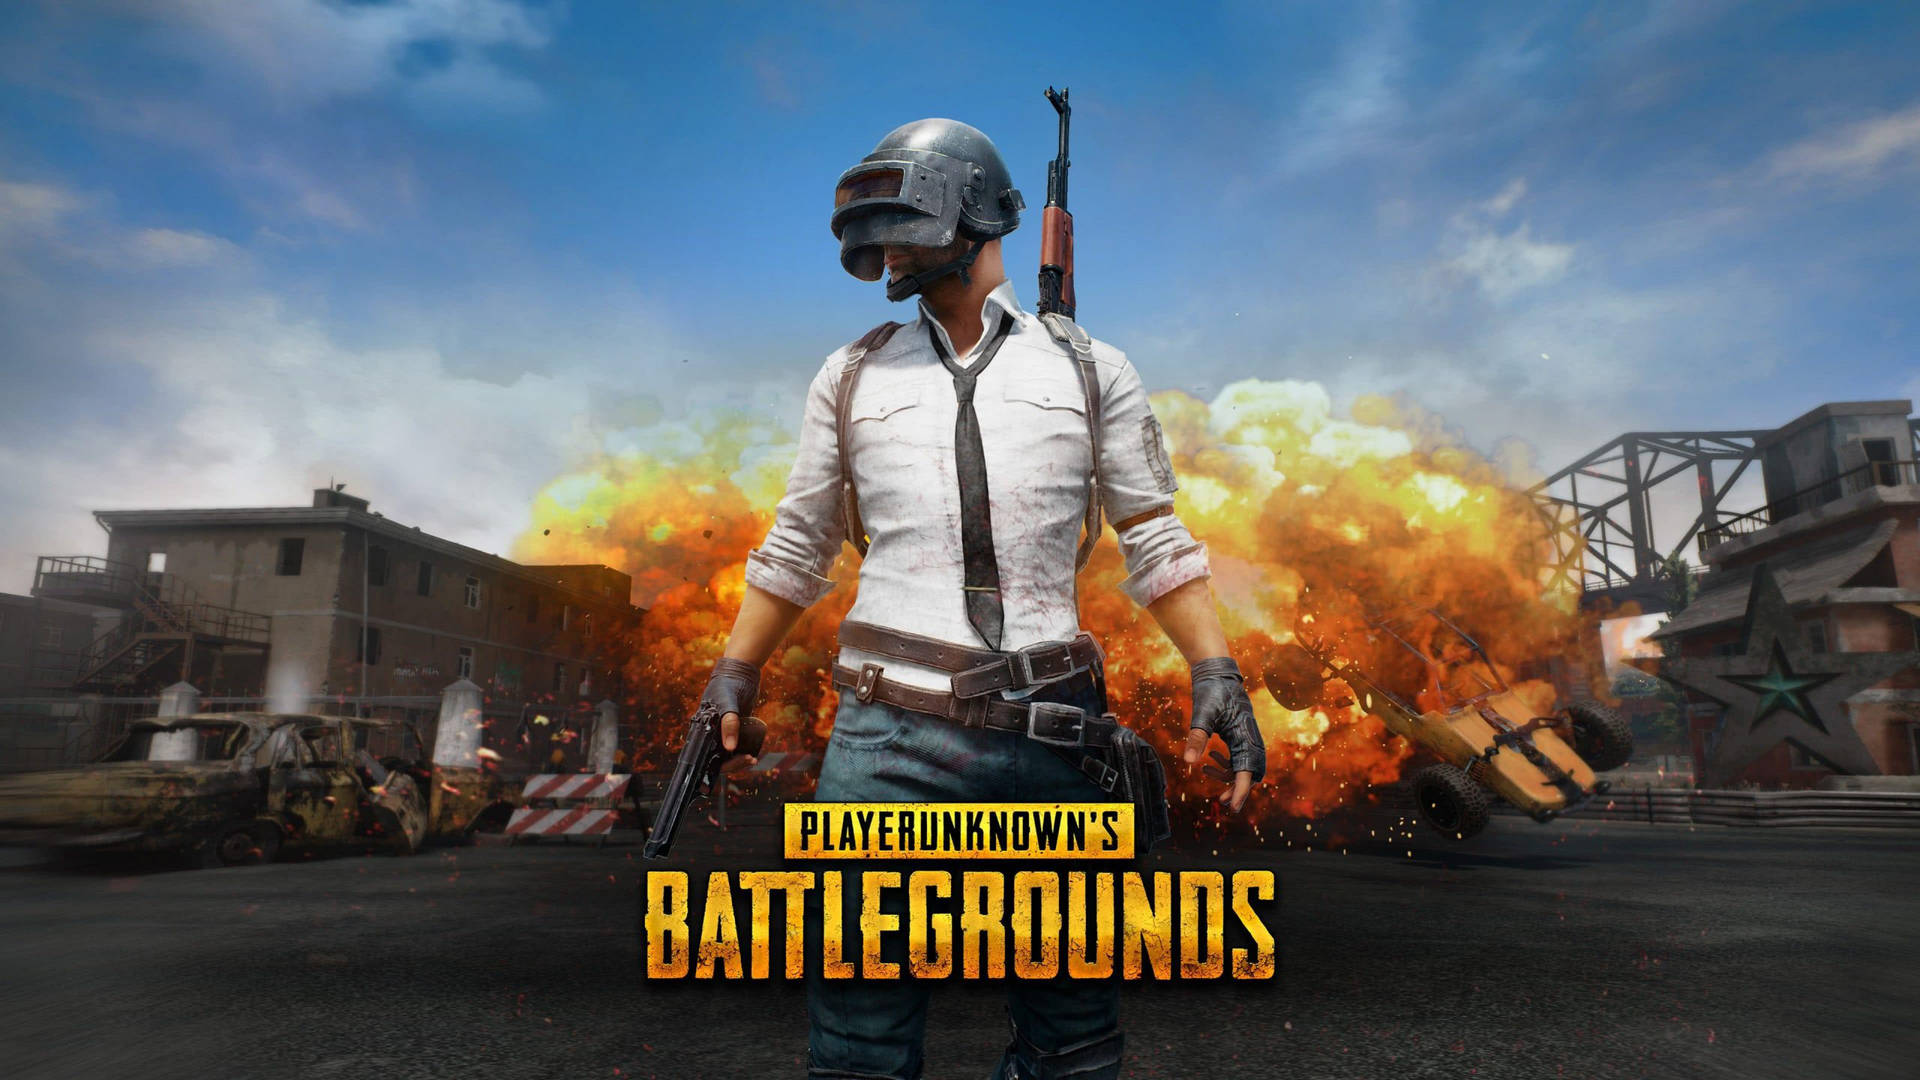 600+] Pubg Wallpapers for FREE 